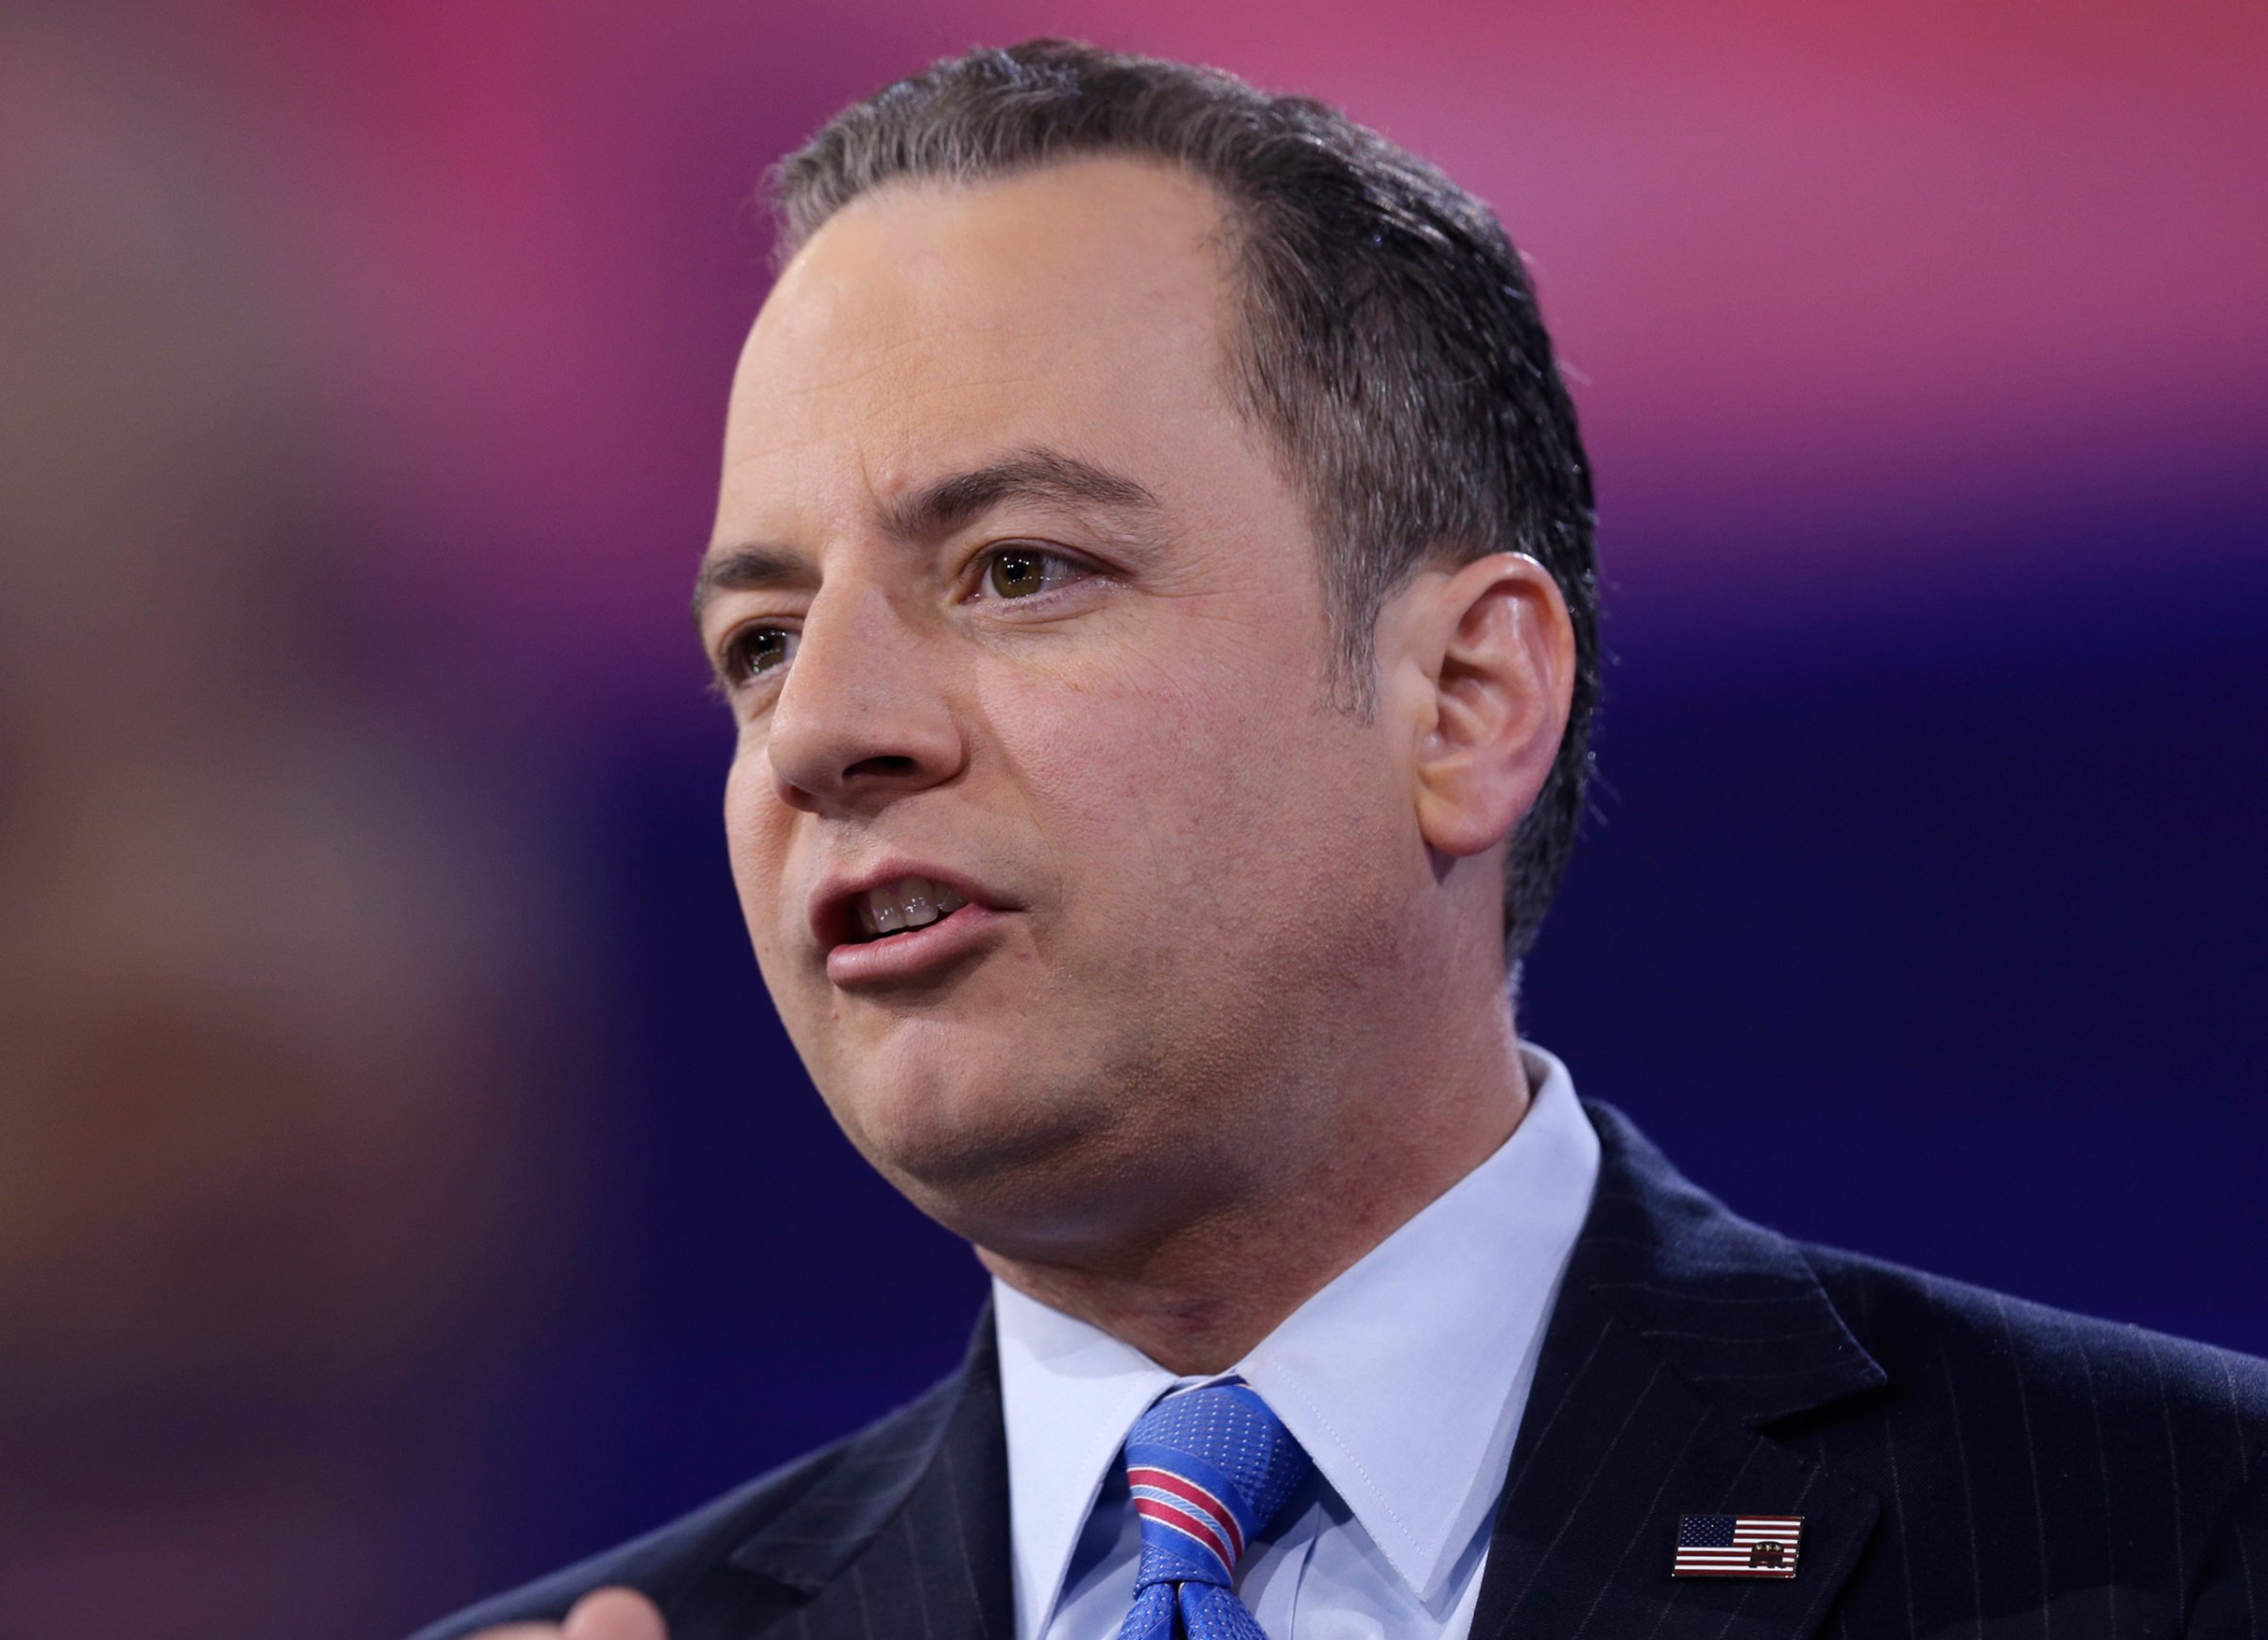 Republican National Committee Chairman Reince Priebus speaks during the Conservative Political Action Conference (CPAC), Friday, March 4, 2016, in National Harbor, Md. (AP Photo/Carolyn Kaster)